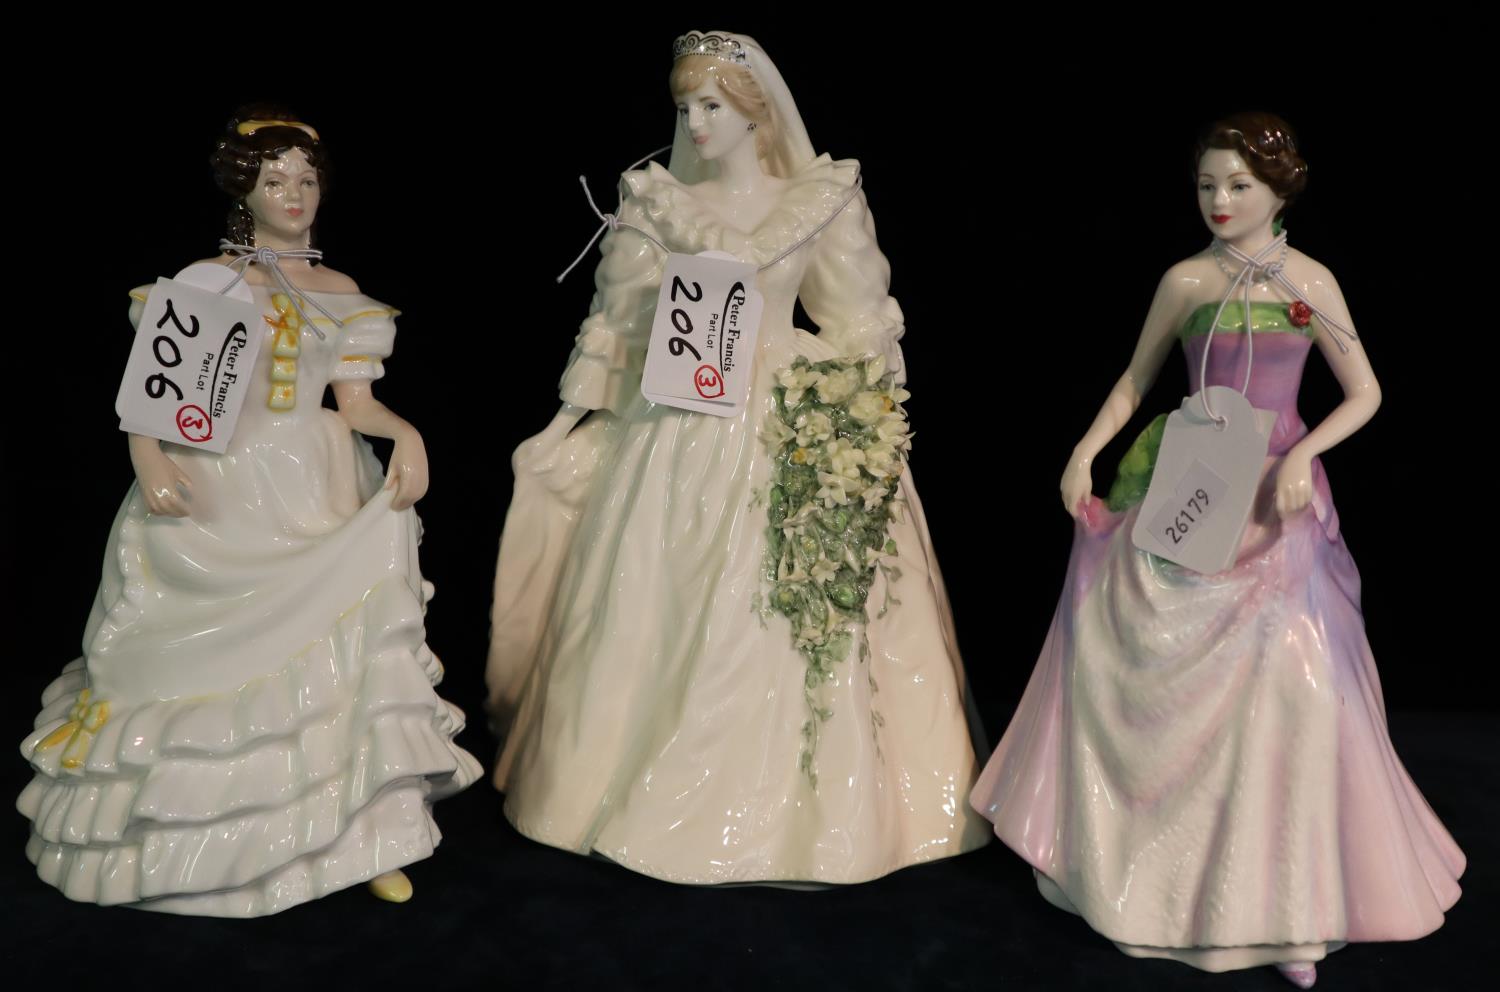 Coalport bone china figurine 'Diana Princess of Wales, limited edition', together with two Royal